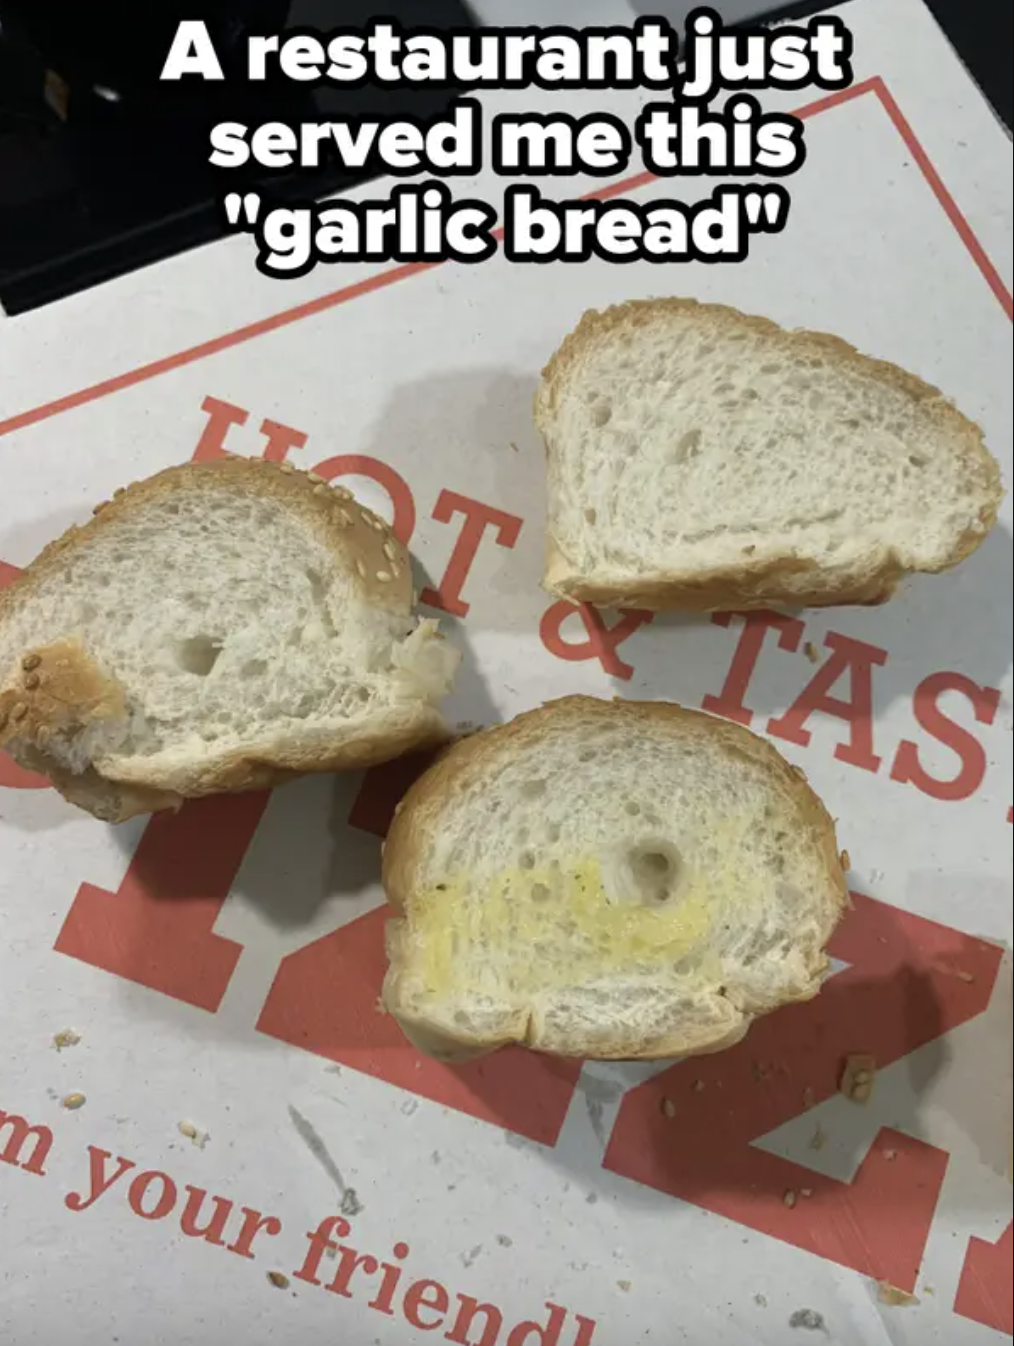 Three pieces of plain bread with faint butter marks labeled as &quot;garlic bread&quot; on a takeaway pizza box with some text